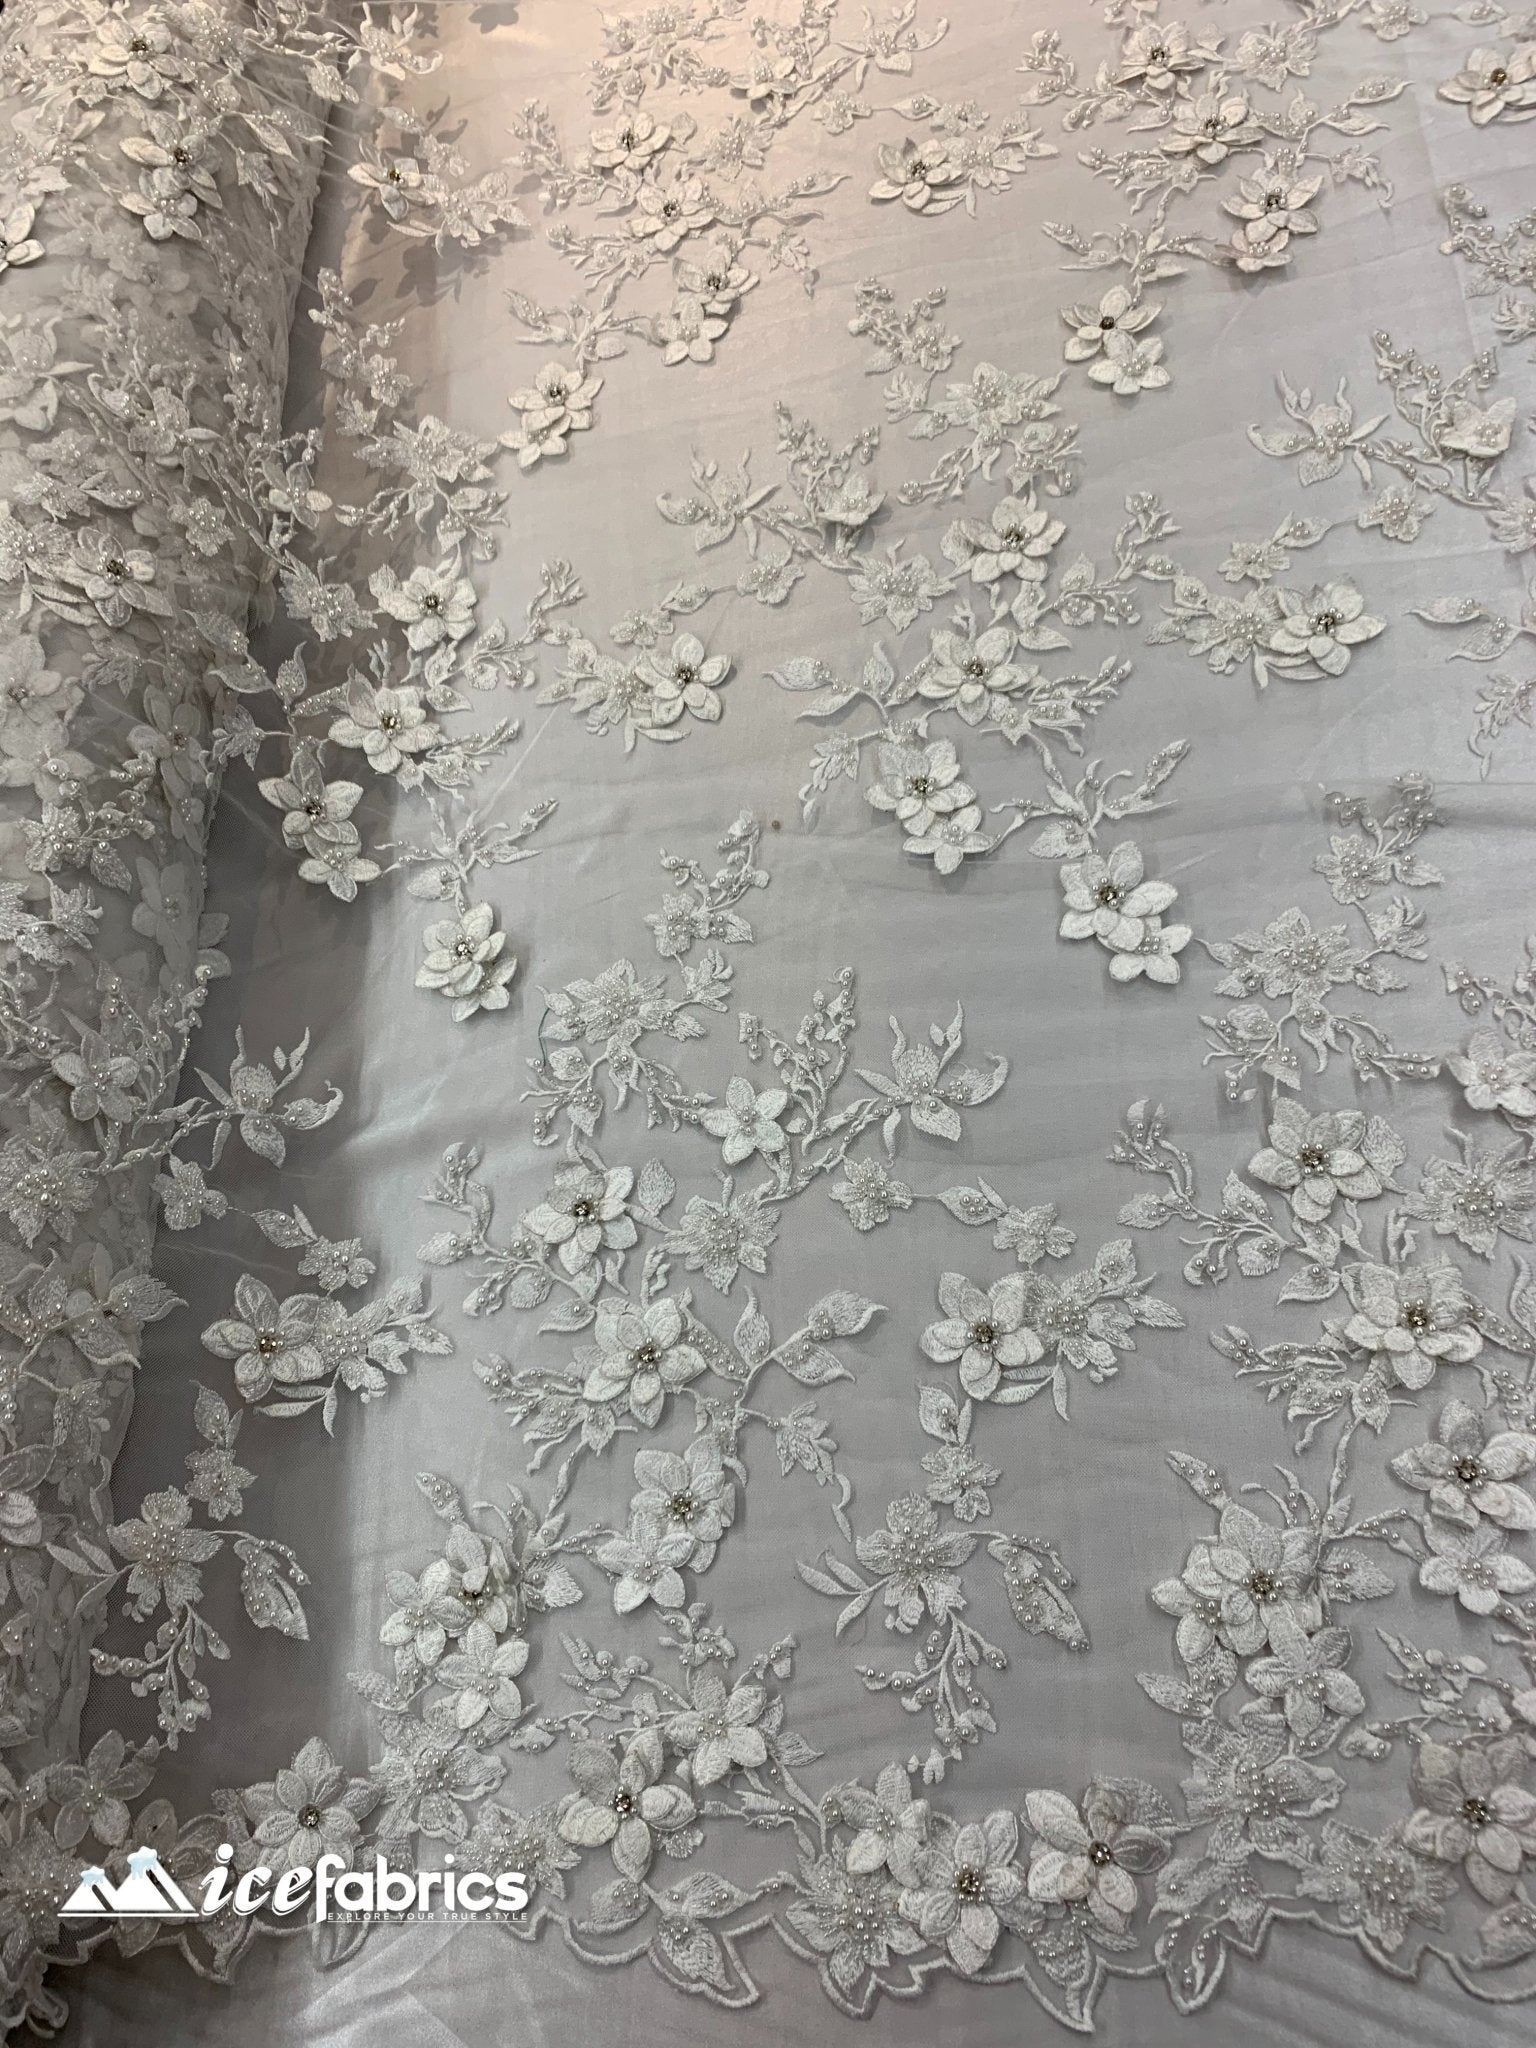 Flowers Embroidered Beaded Fabric/ Mesh Lace Fabric/ Bridal Fabric/ICE FABRICSICE FABRICSWhiteFlowers Embroidered Beaded Fabric/ Mesh Lace Fabric/ Bridal Fabric/ ICE FABRICS White